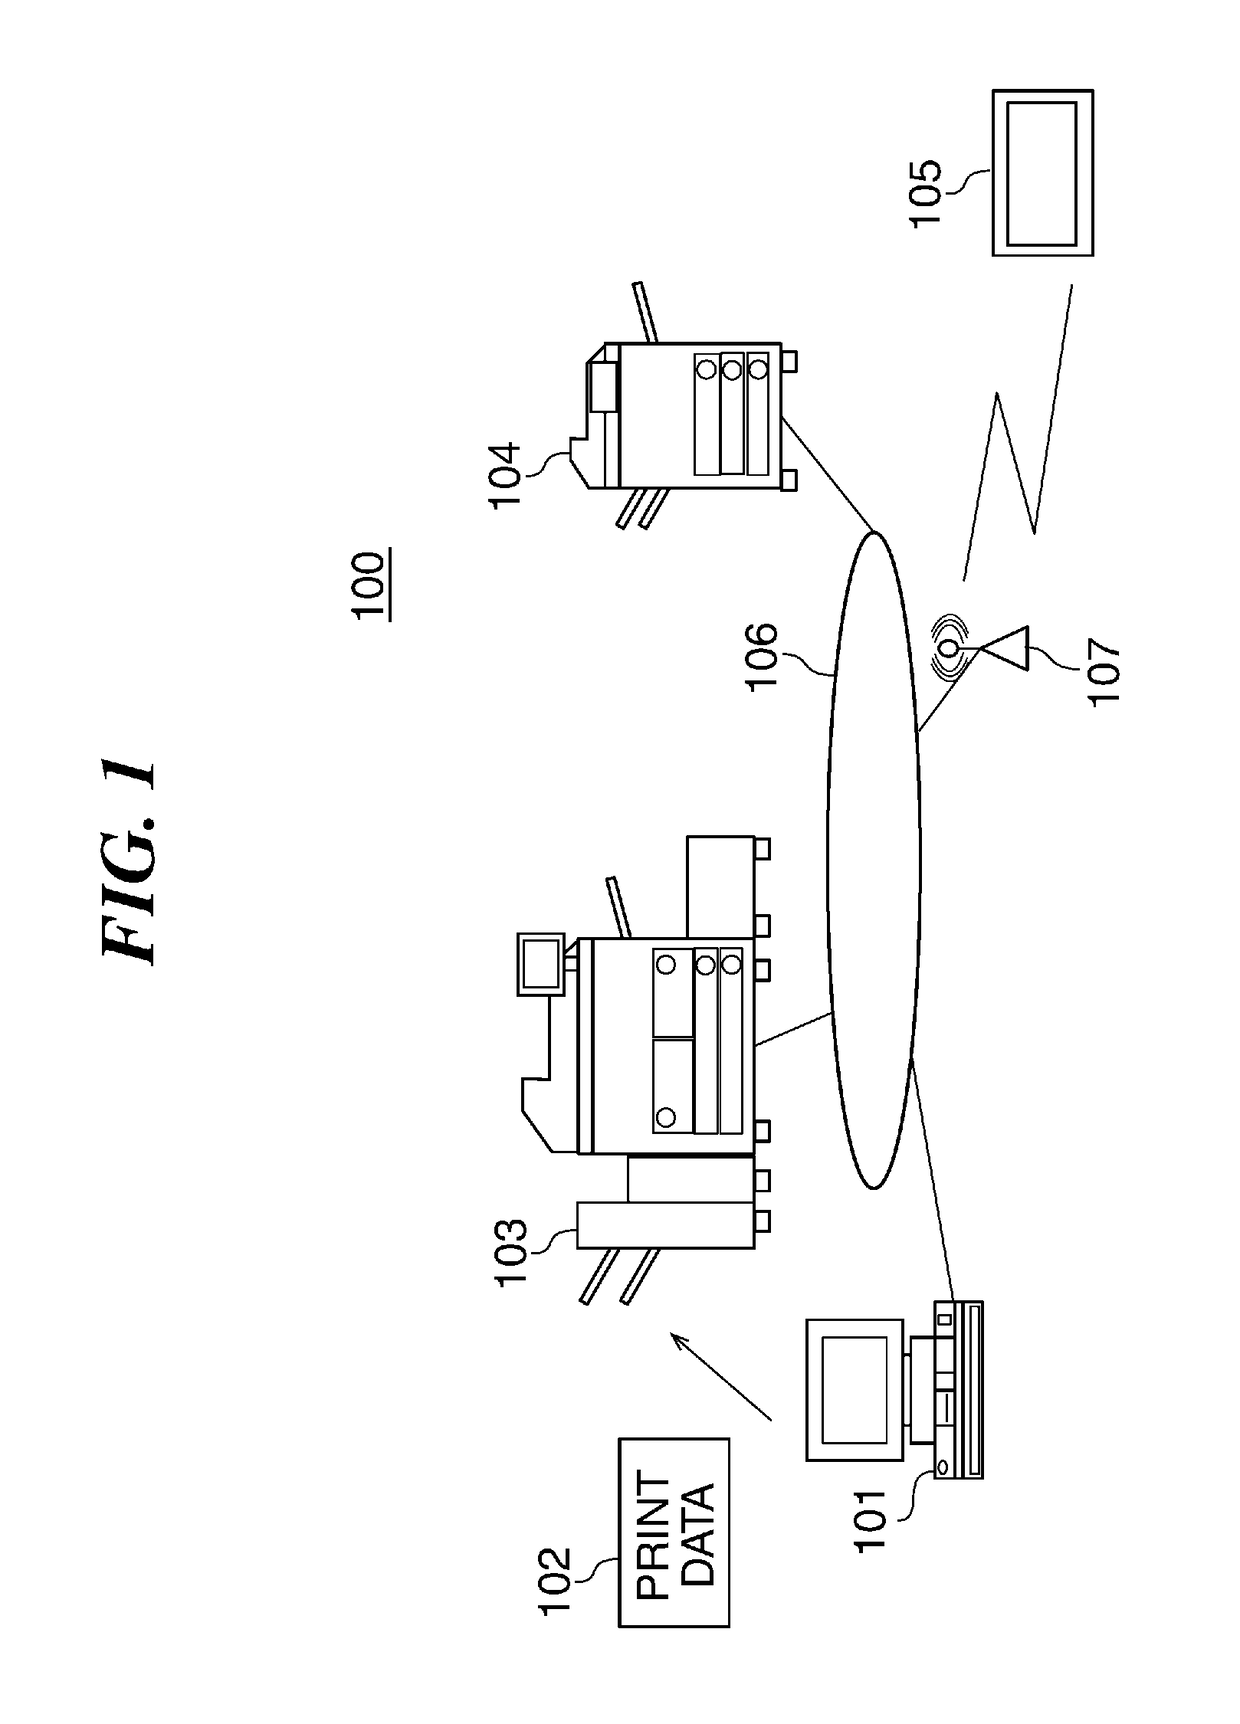 Image processing system that performs preview display, image processing apparatus, display control apparatus, display control method, and storage medium